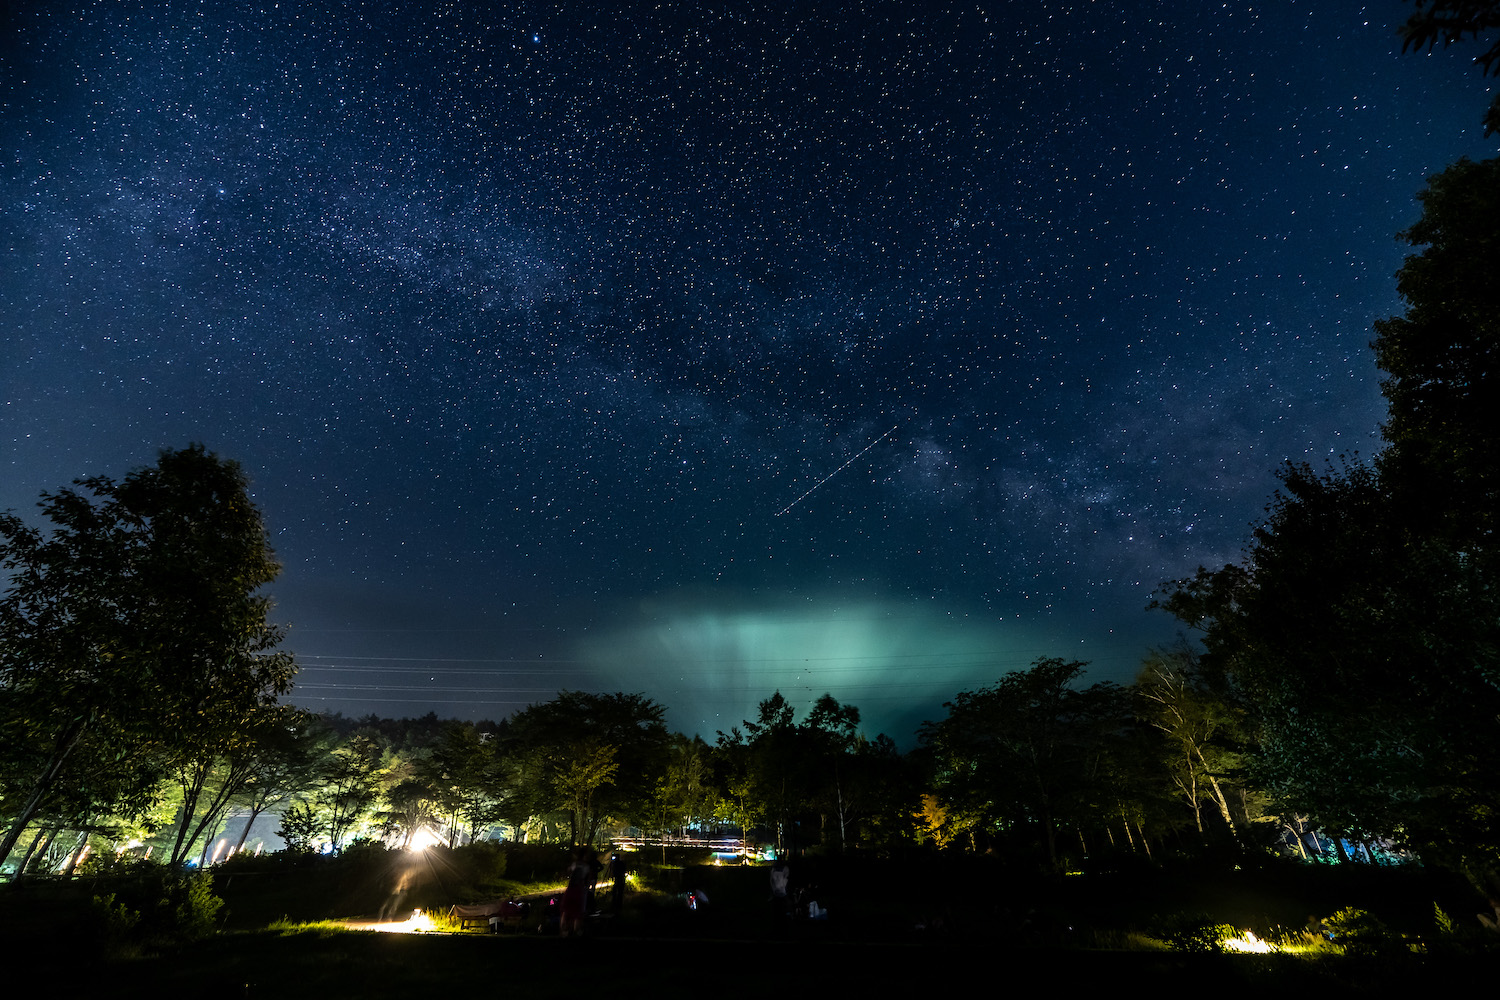 Achi Village: Japan’s Home for the Best Stargazing